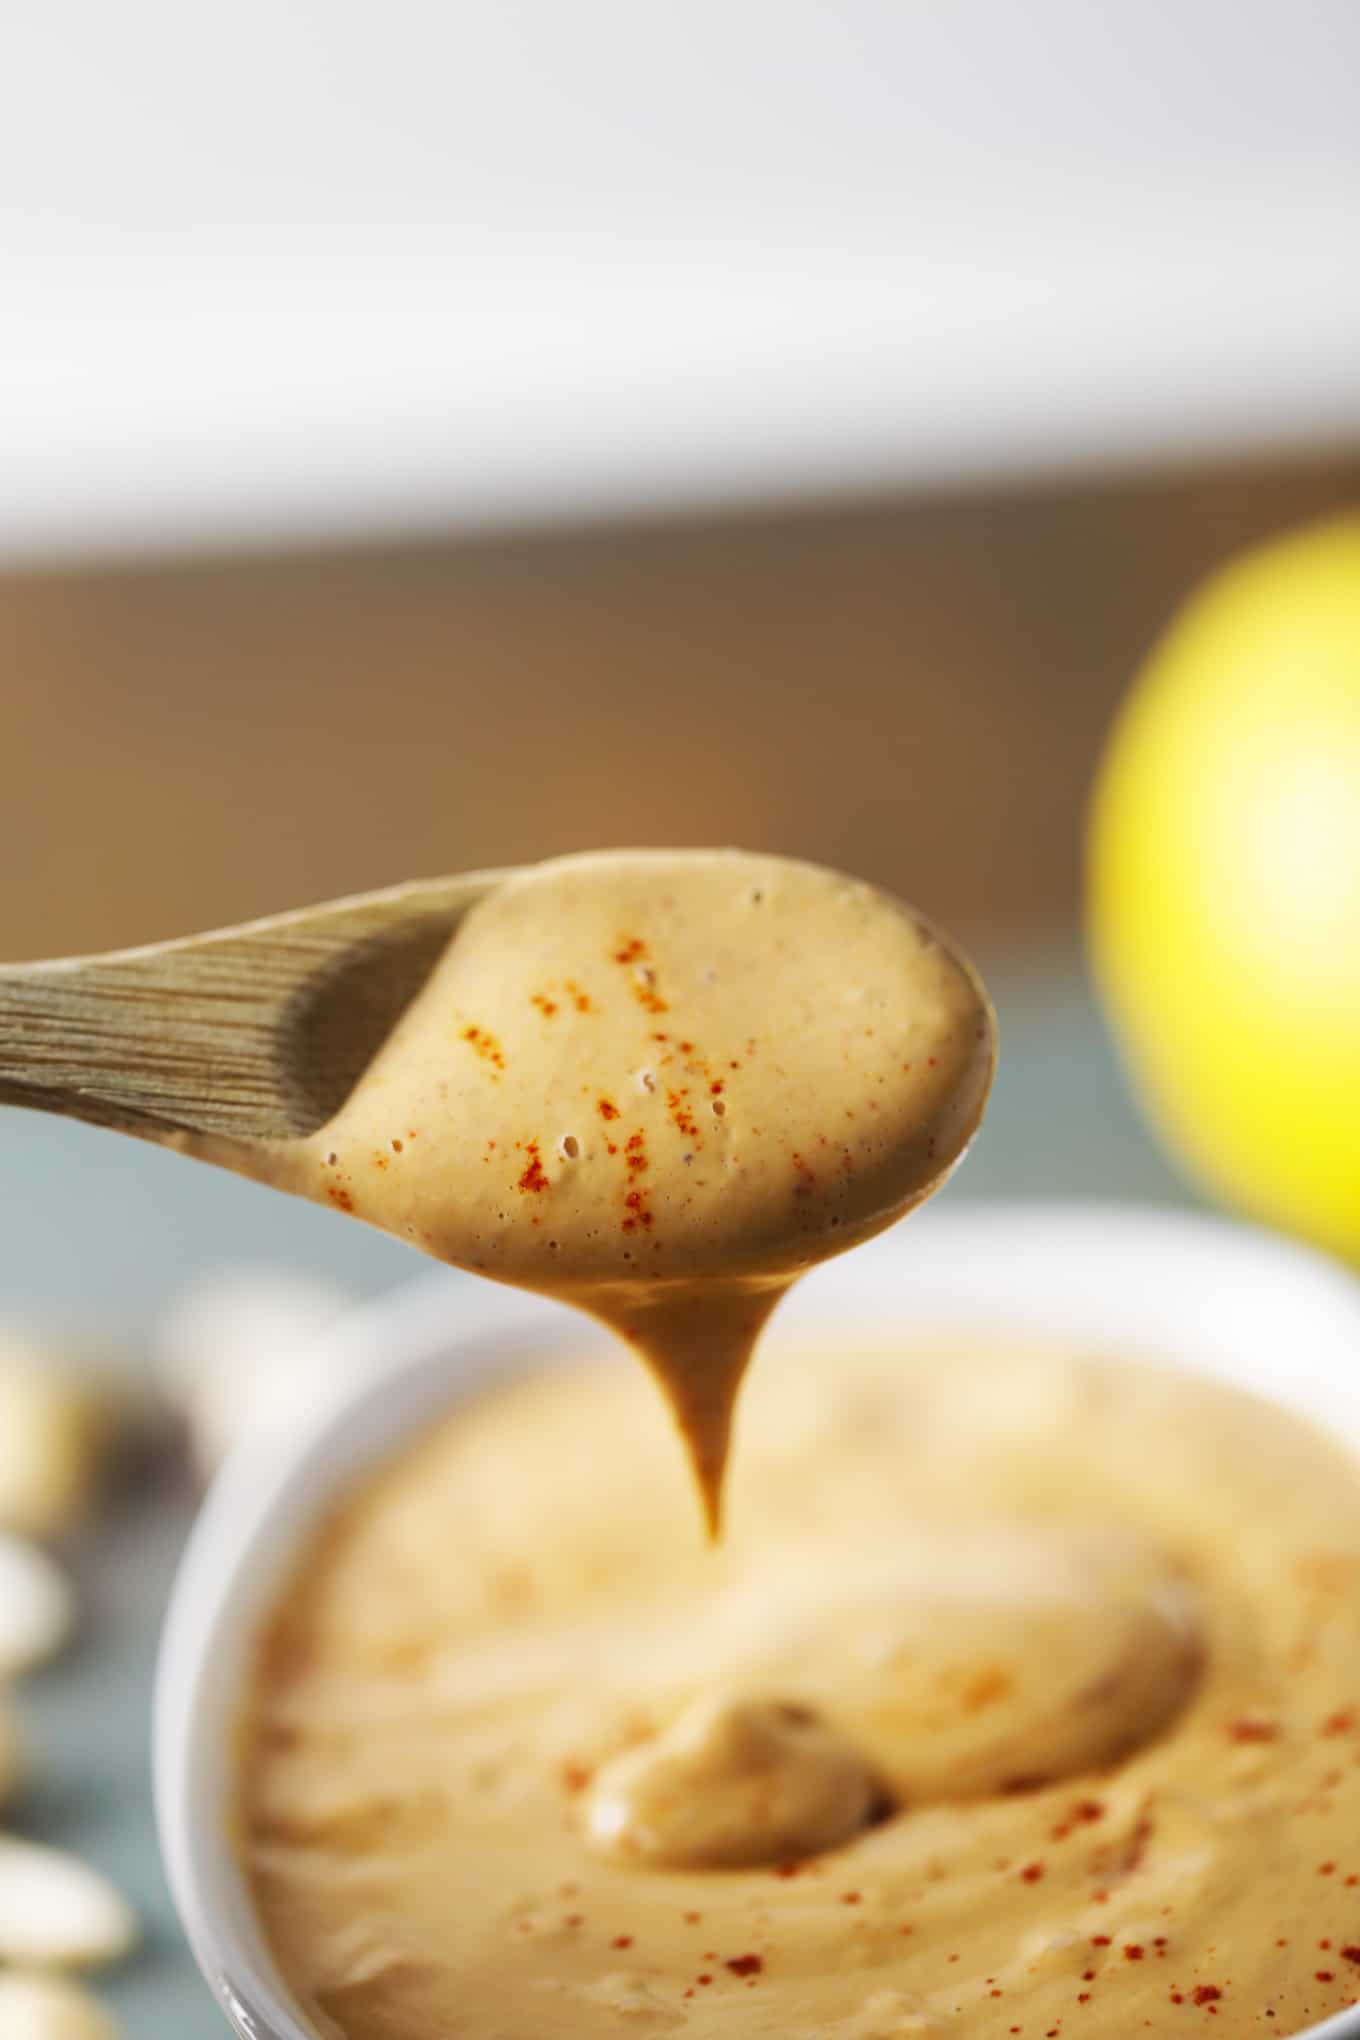 A wooden spoon that has been dipped in smoky Cajun sauce.